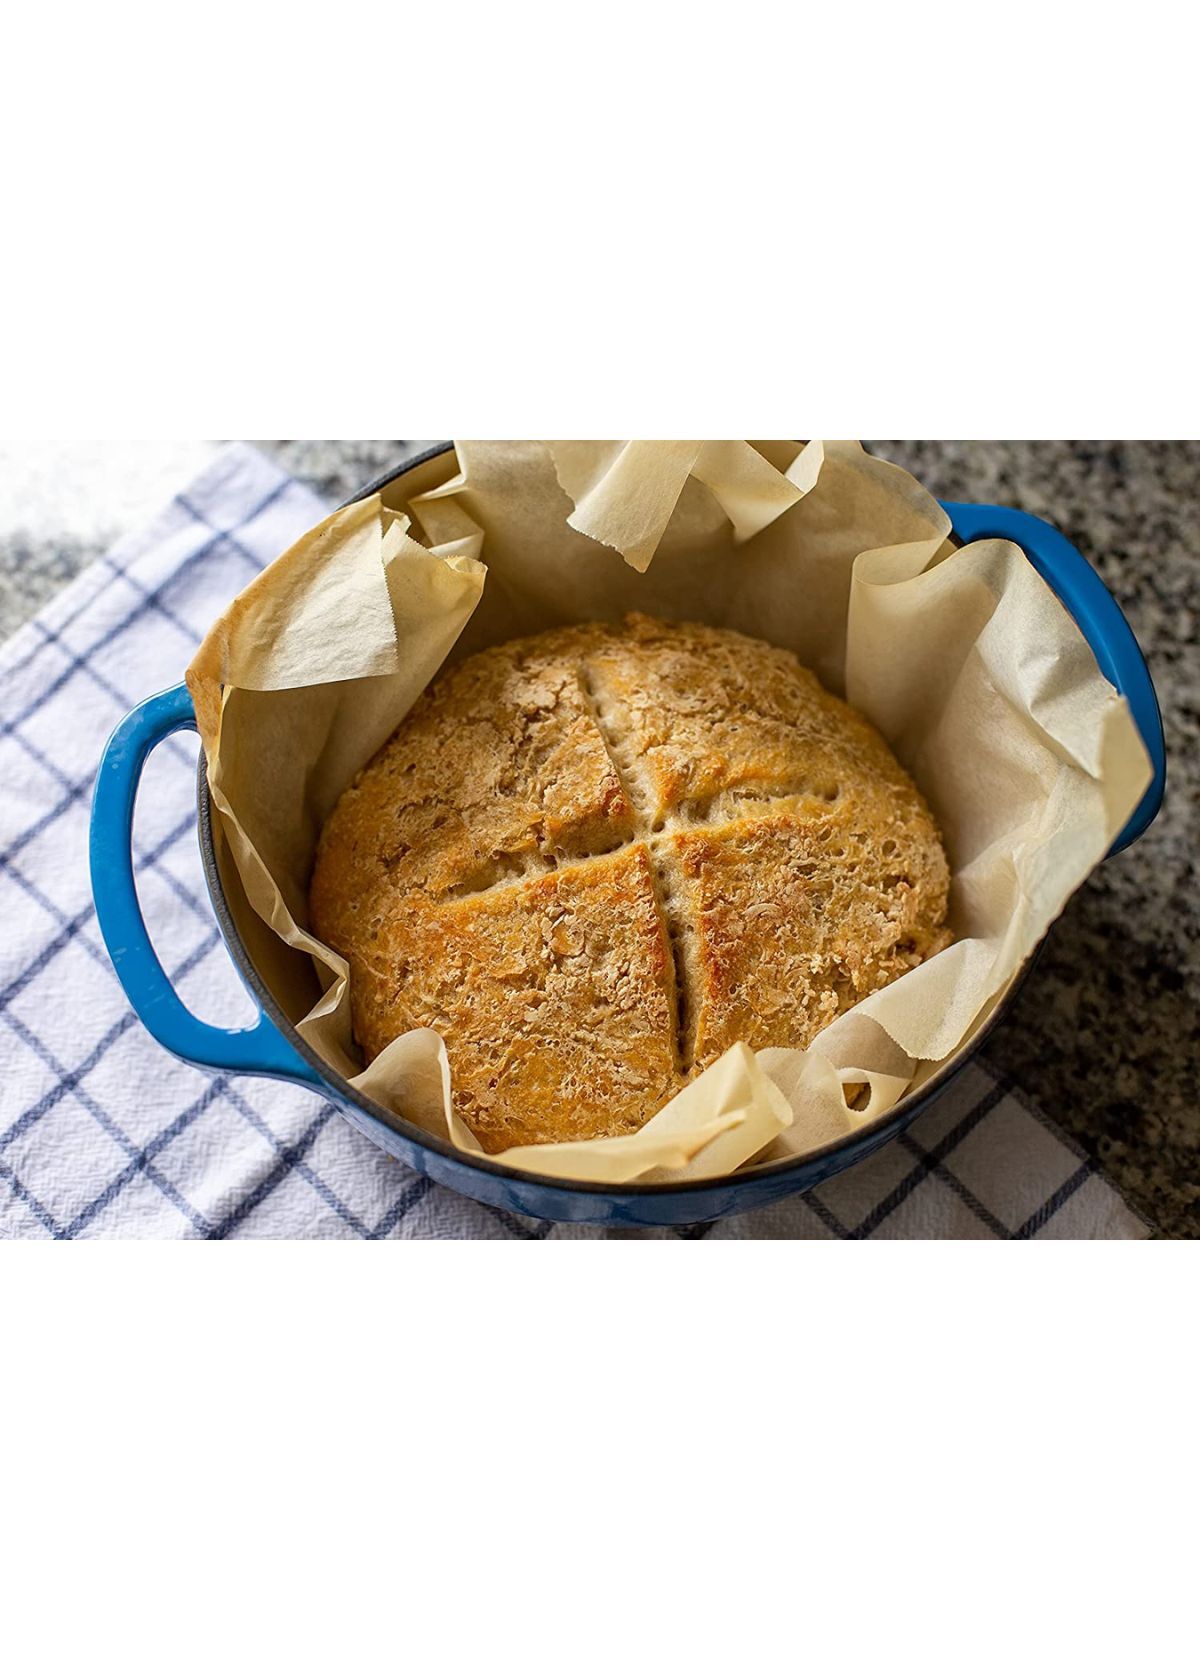 The Best Dutch Oven for Baking Bread